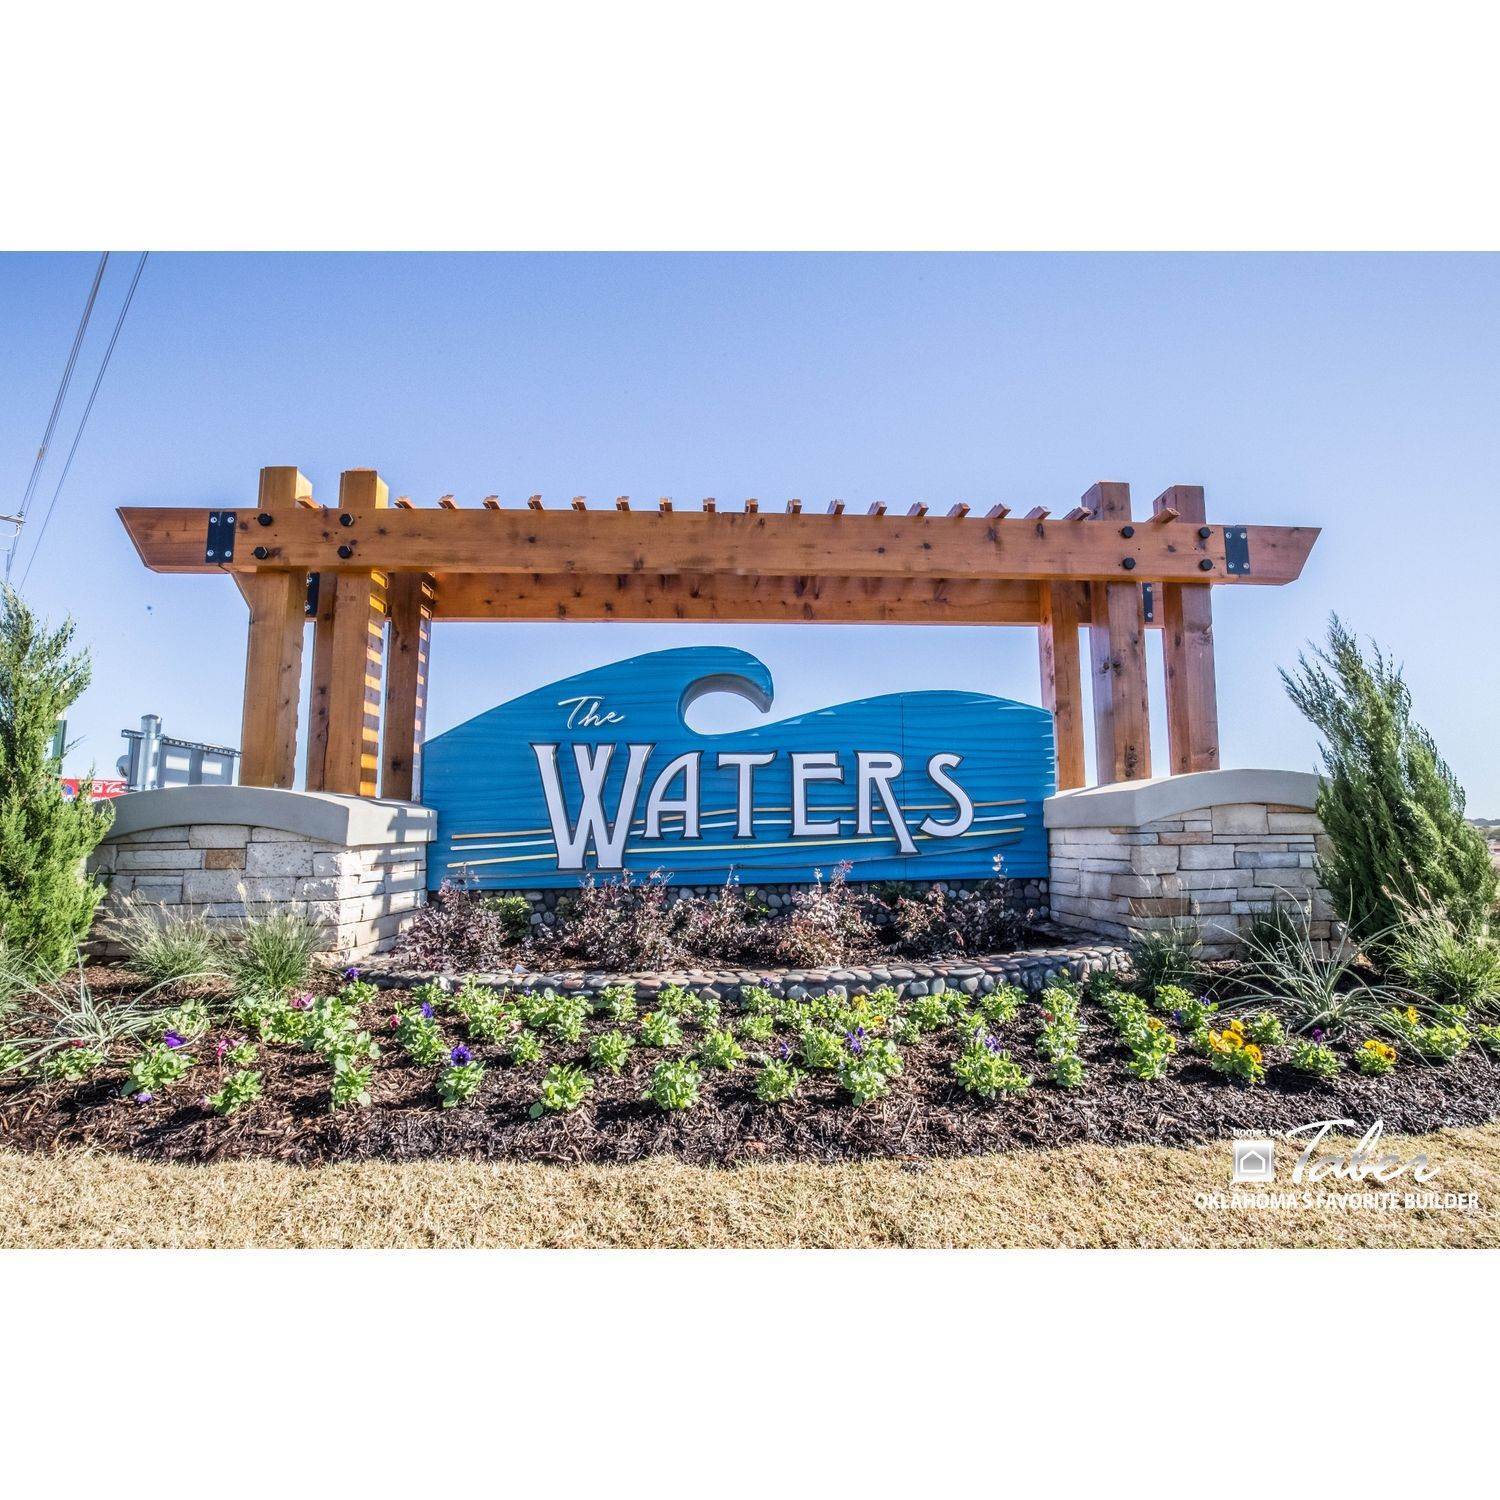 The Waters building at 3441 Superior Drive, Moore, OK 73160